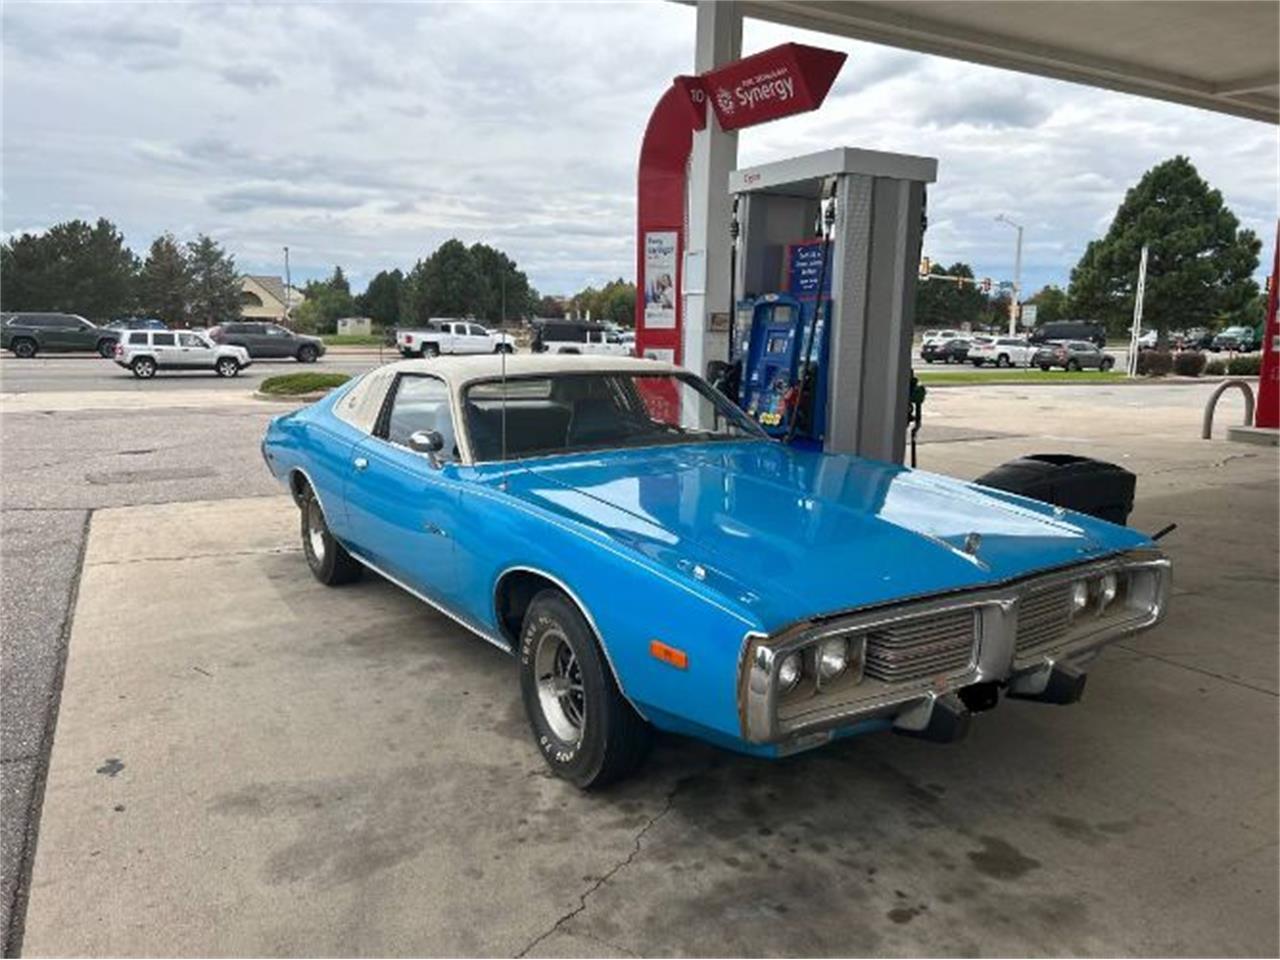 For Sale: 1973 Dodge Charger in Cadillac, Michigan for sale in Cadillac, MI